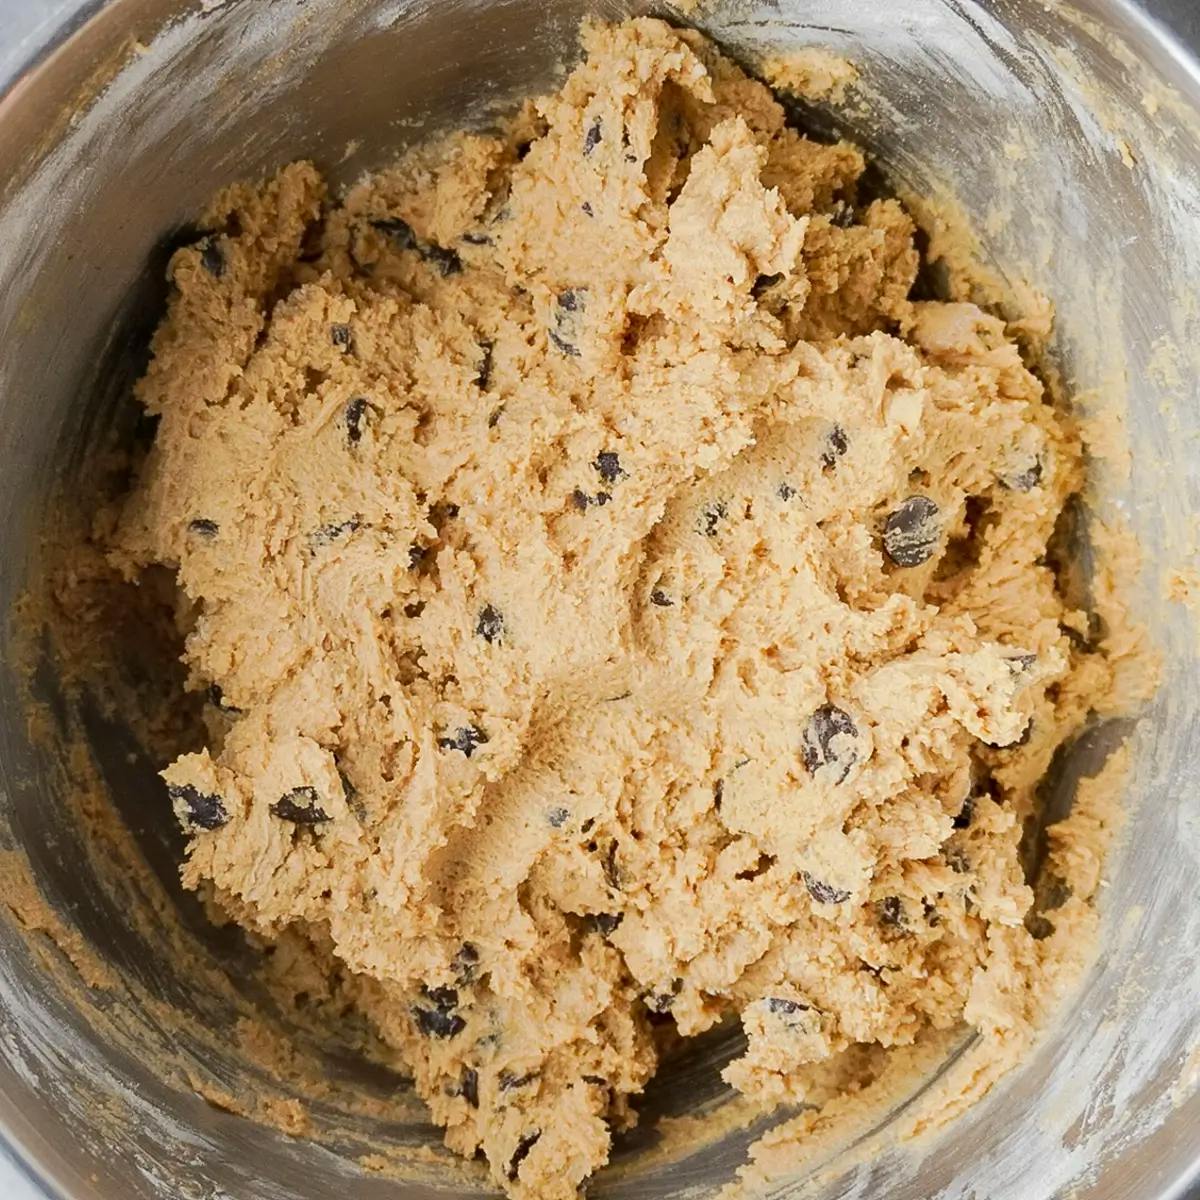 The finished vegan chocolate chip cookie dough, ready to chill.